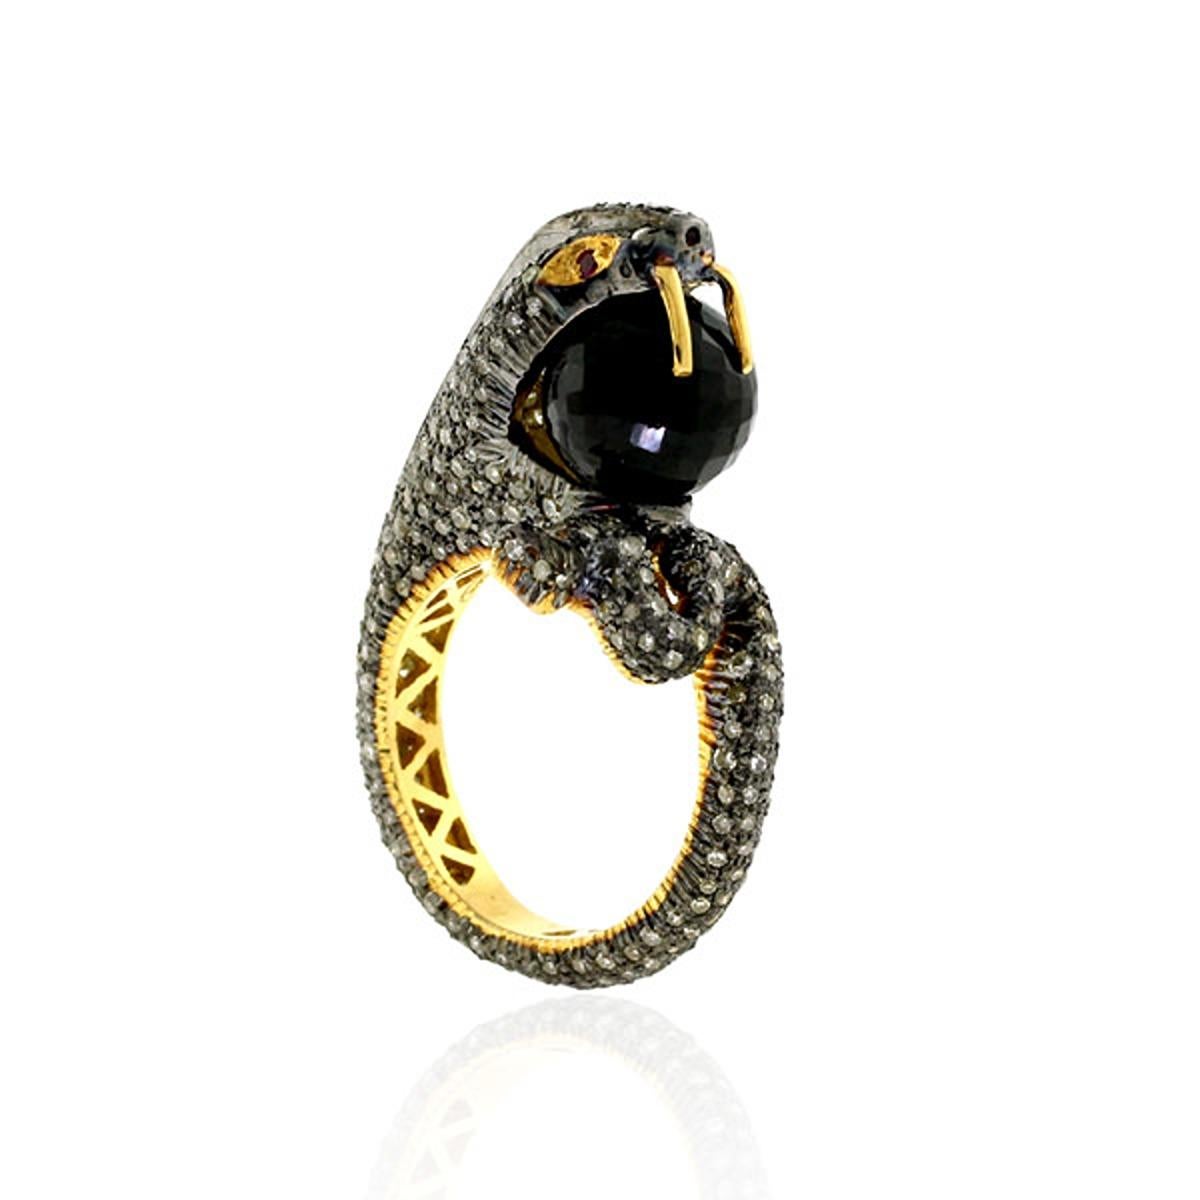 Mixed Cut Pave Diamonds Snake Shaped Ring w/ Ruby Eyes & Black Onyx Made In Gold & Silver For Sale